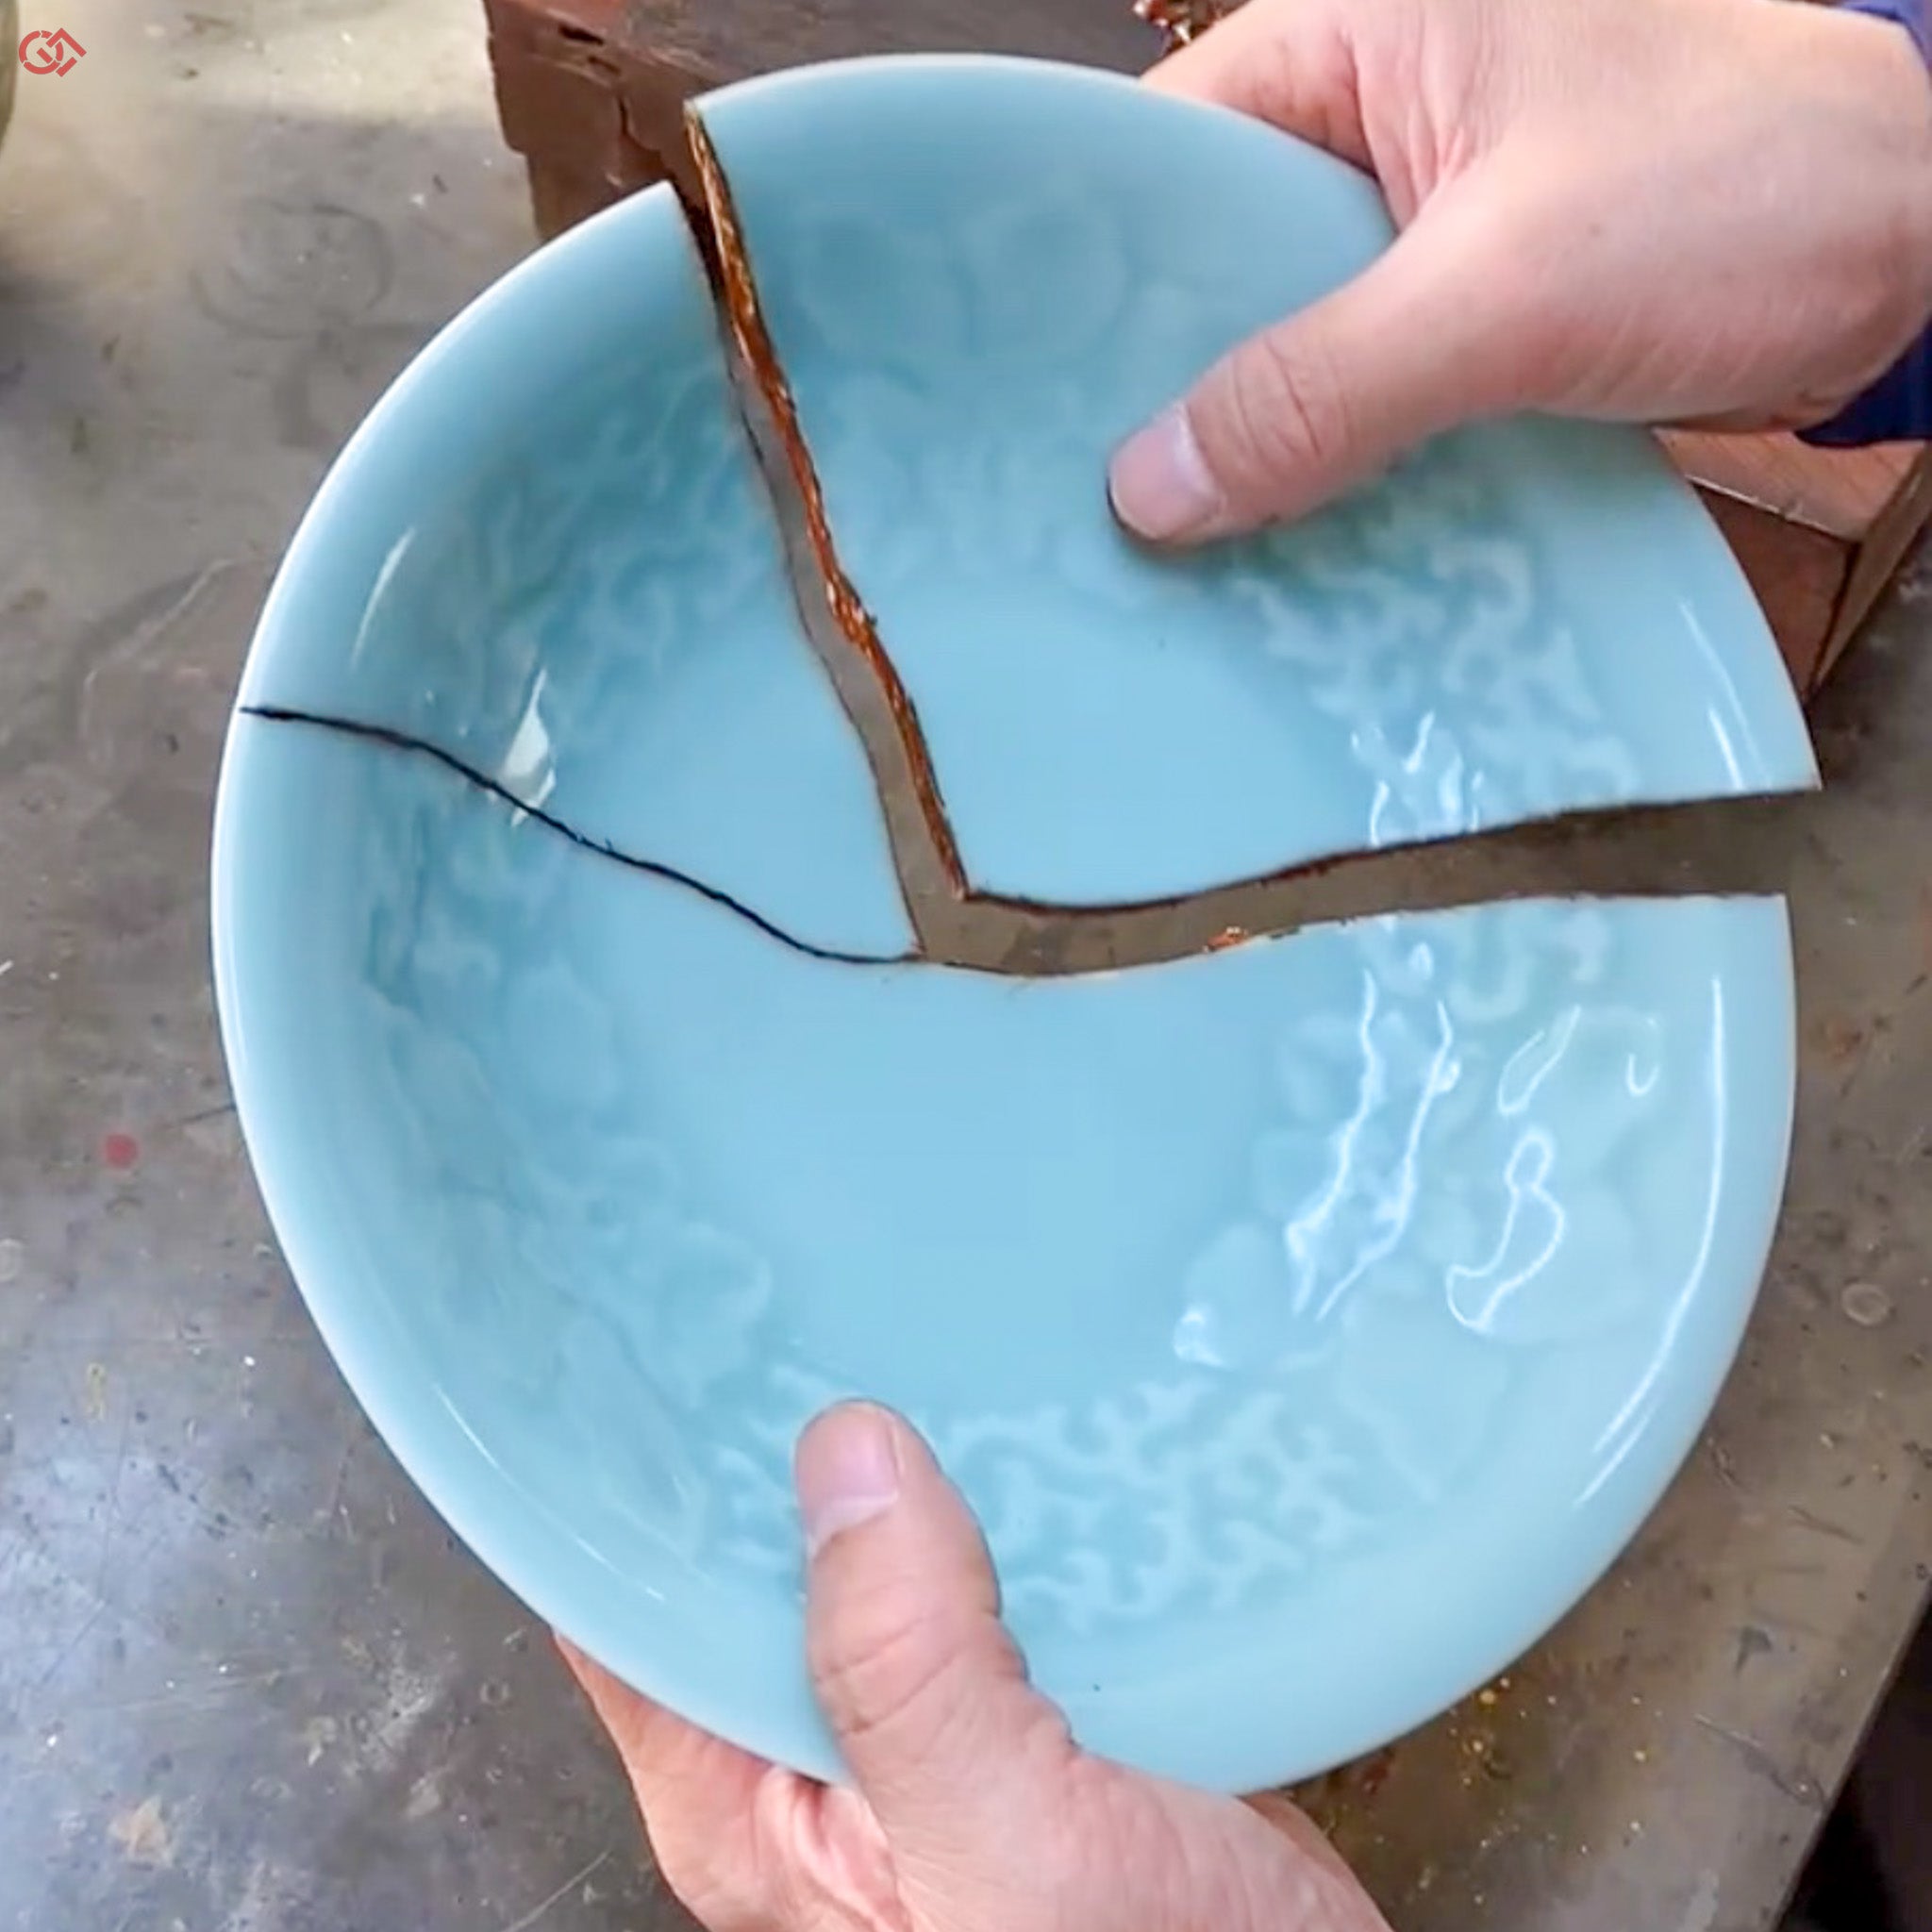 Traditional Kintsugi repair with natural lacquer